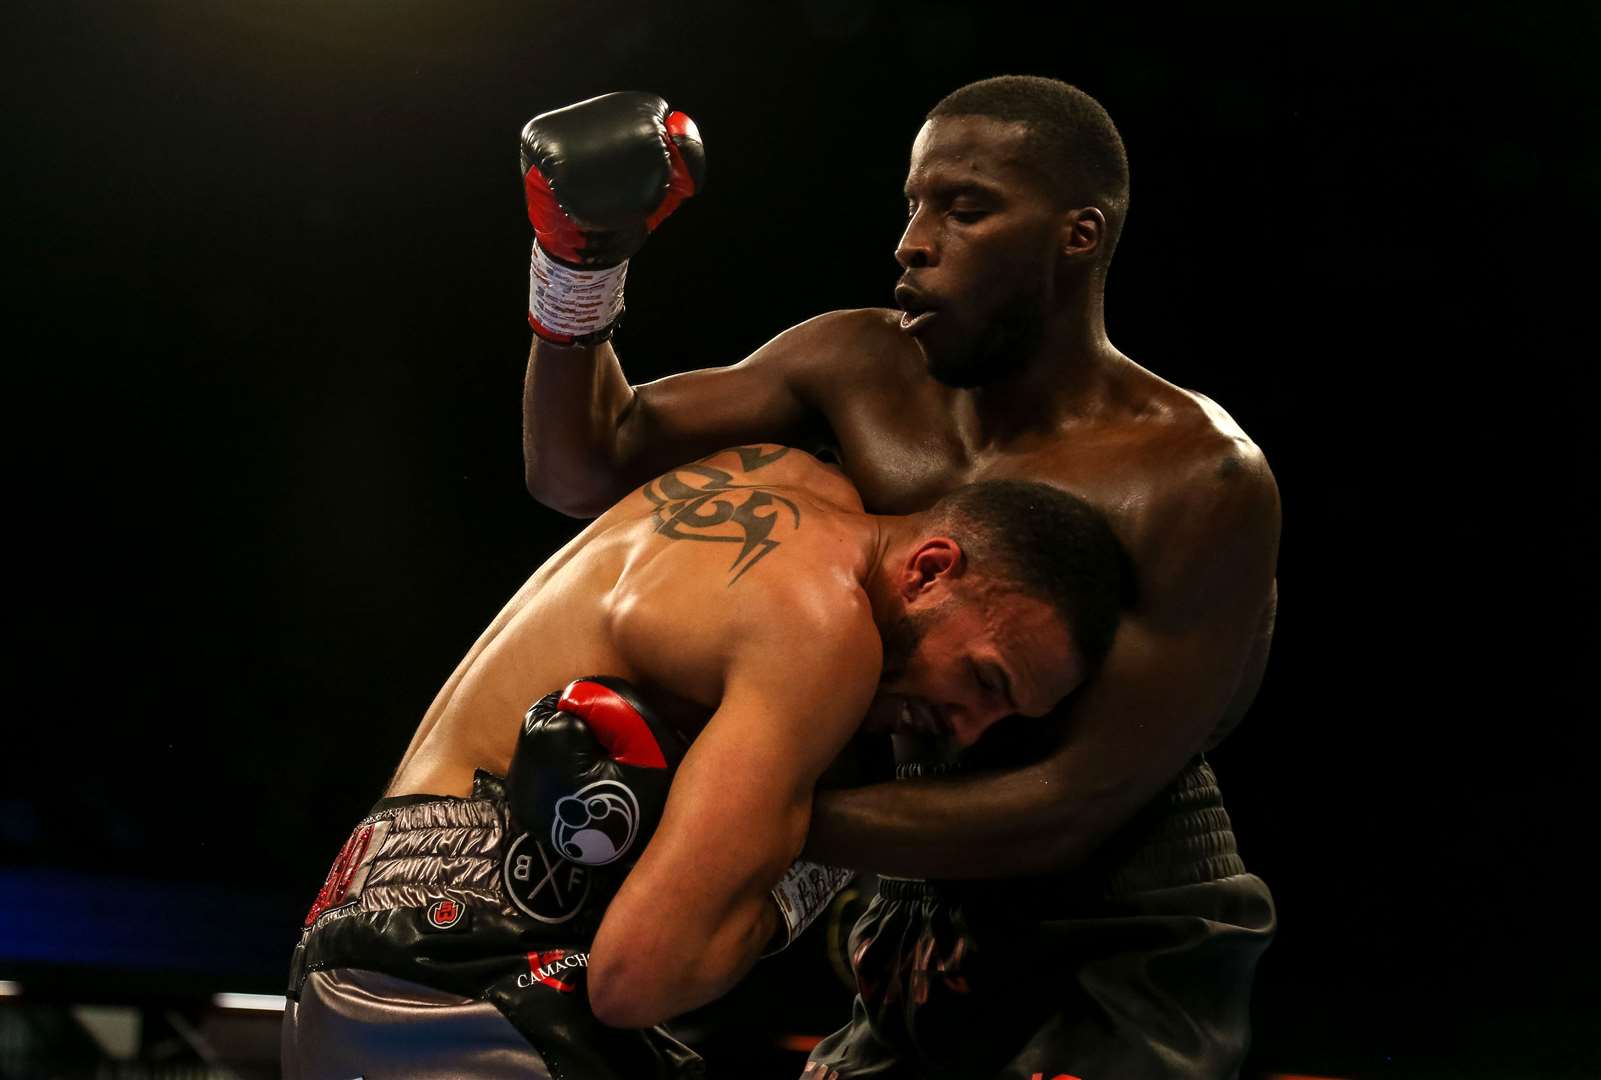 Lawrence Okolie (right) in action against Wadi Camacho during their British and Commonwealth Championship bout at the Copper Box Arena, London (PA)